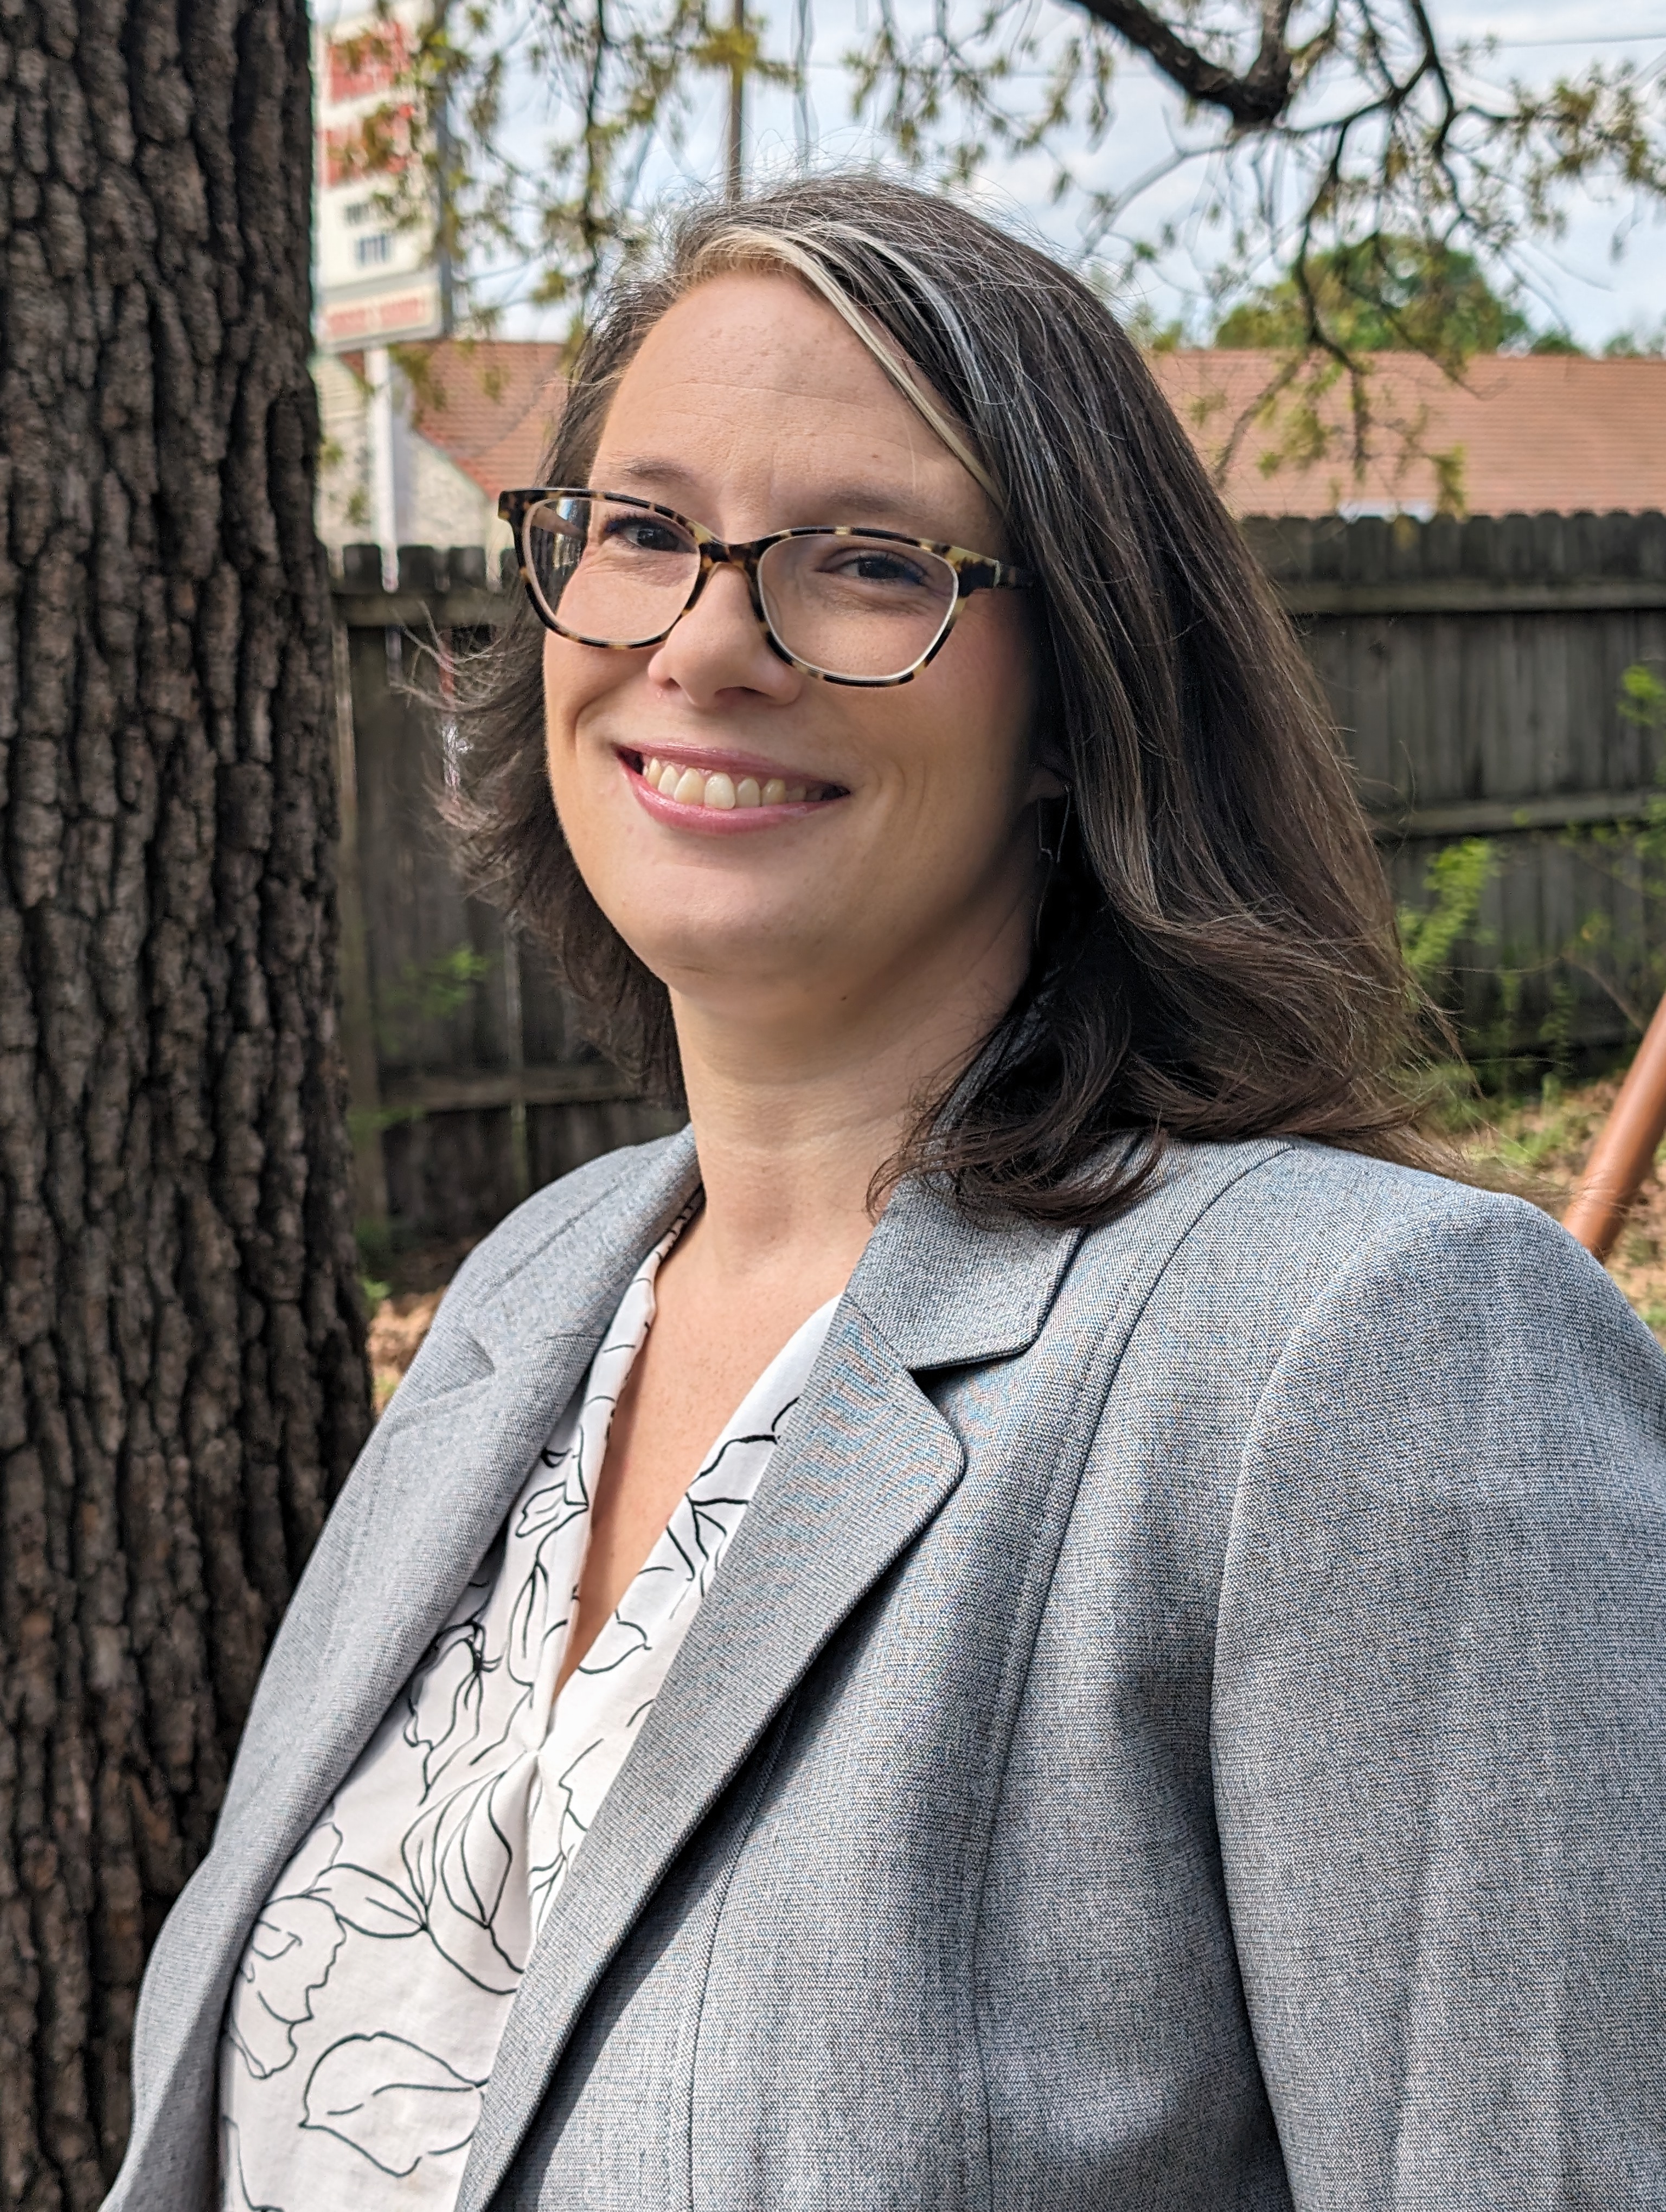 Headshot of the Center for Health Communication's Administrative Assistant Jen Graham, a 40-50 year-old white woman with shoulder-length brown hair wearing glasses and a gray blazer smiling at the camera.